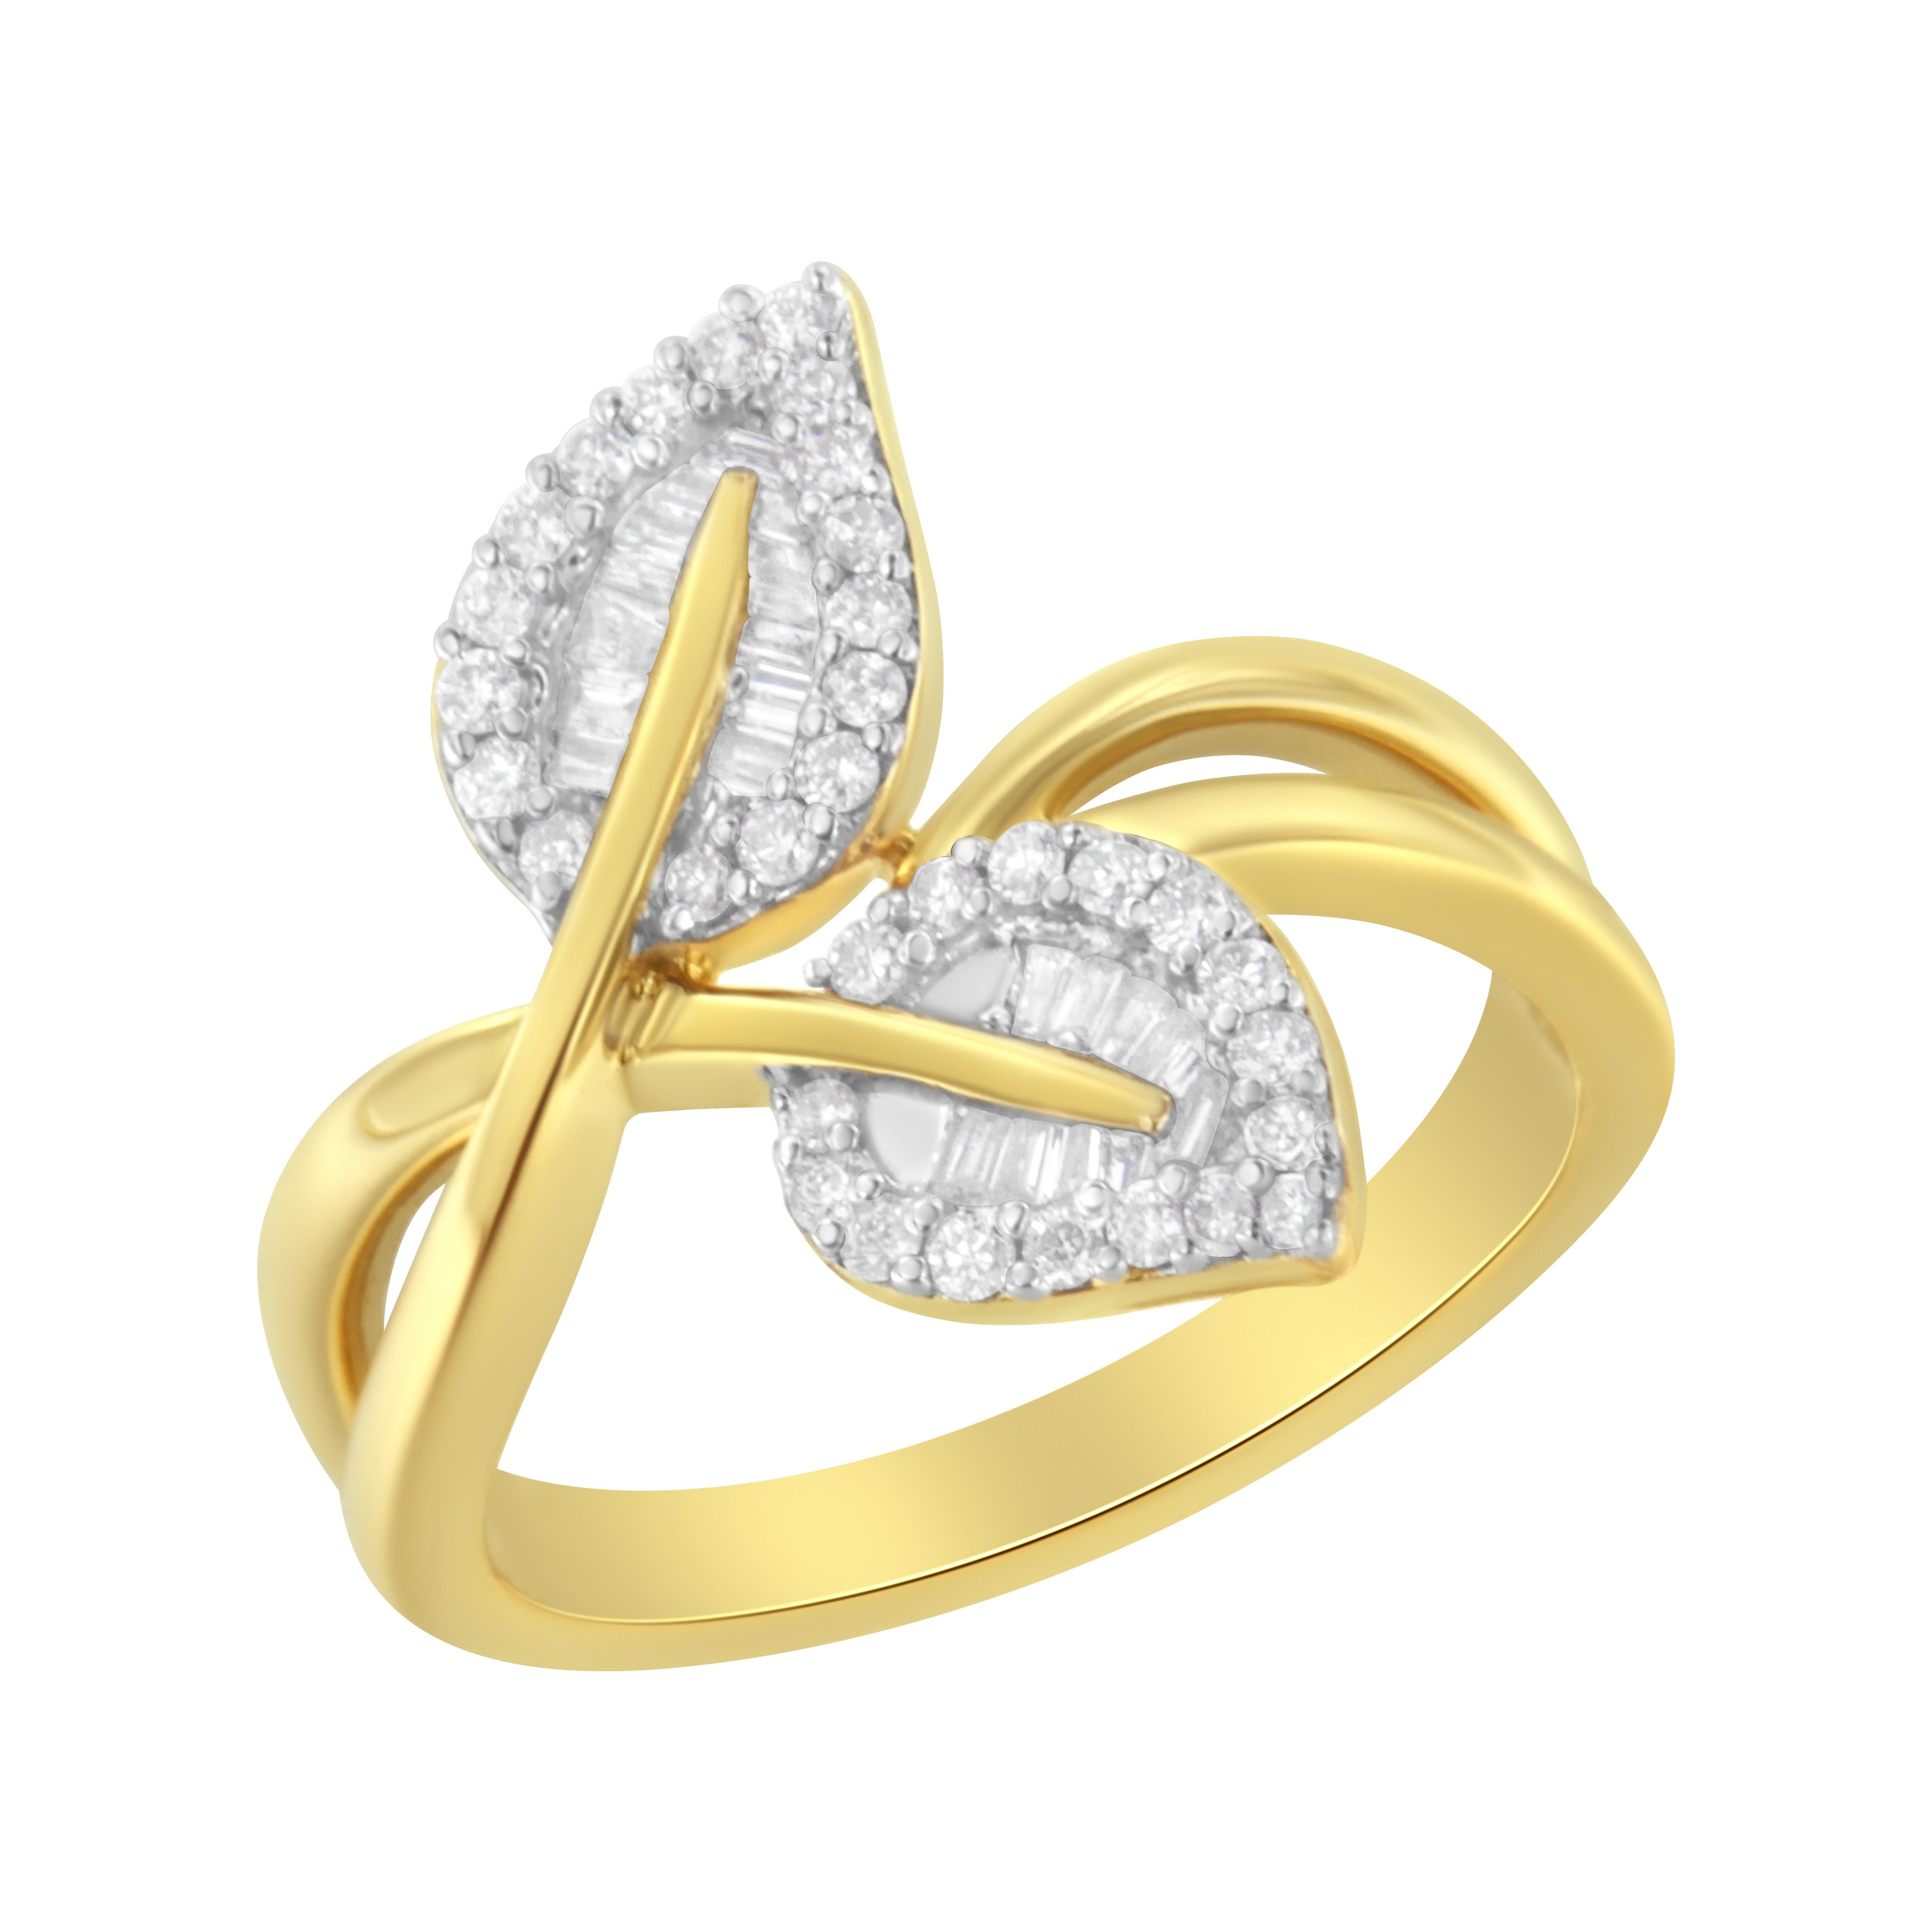 This stunning nature inspired ring design is perfect for everyday wear. Crafted in 10k yellow gold, this design features 3/8ct TDW in diamonds. A warm yellow gold ring band holds as its centerpiece a trio of leaves. Each leaf is studded with